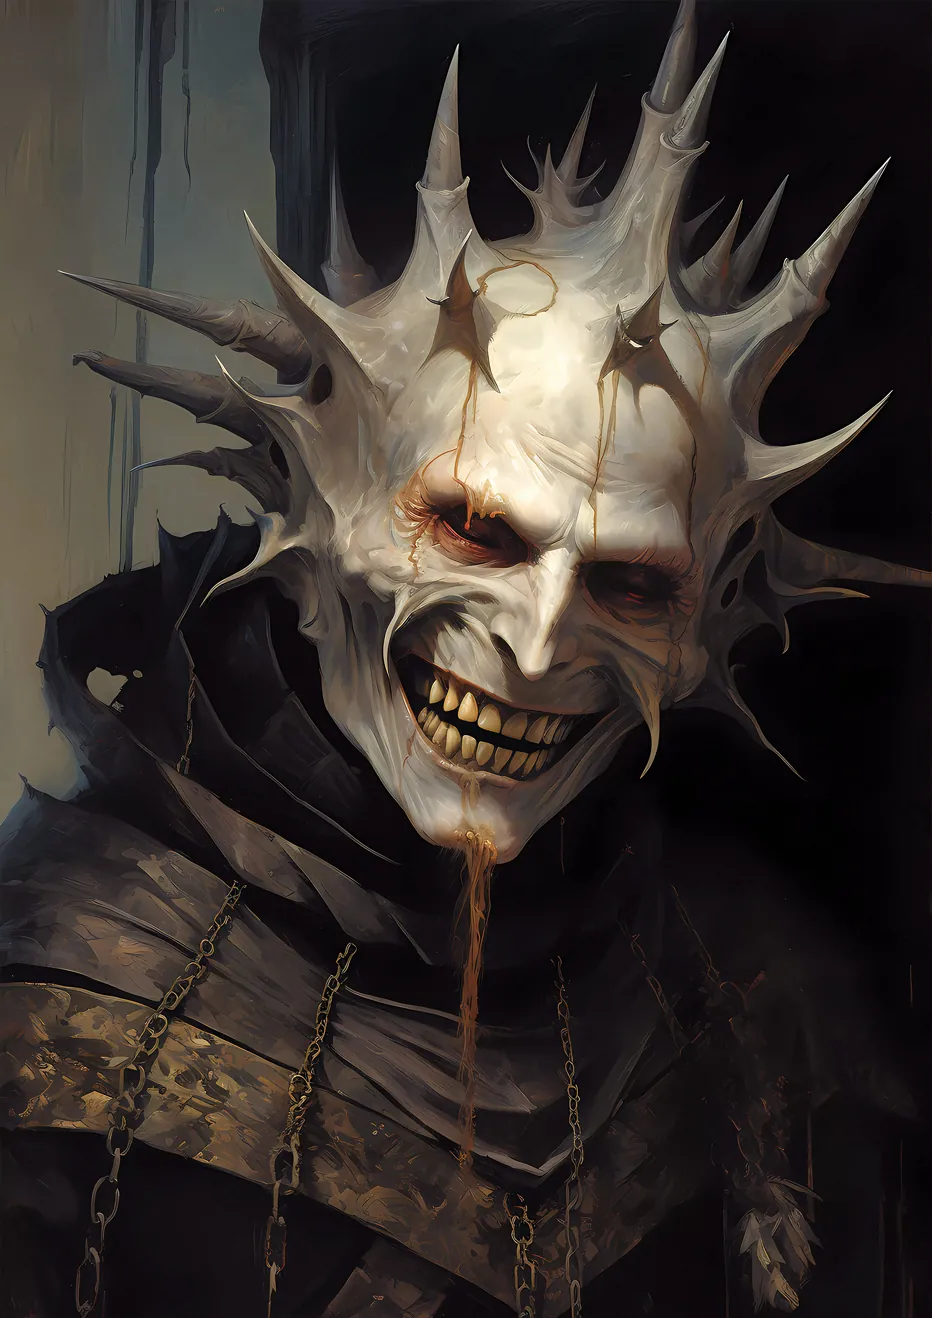 Jester of Madness - A pale, grinning man with sharp spikes on head, yellow oozing liquid, and a torn brown cloak in a dark, eerie setting.